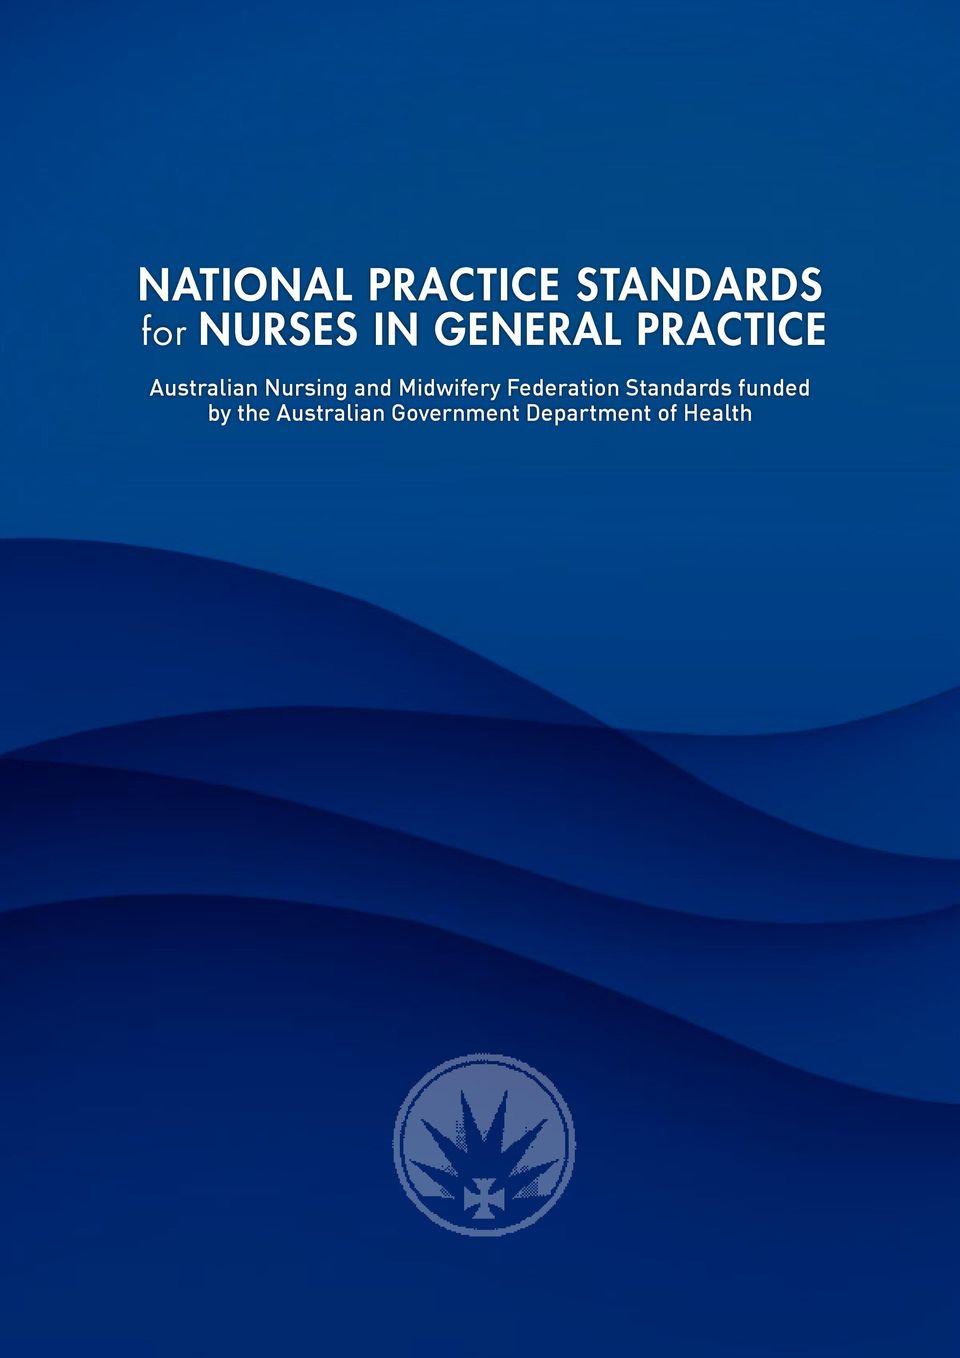 Midwifery Federation Standards funded by